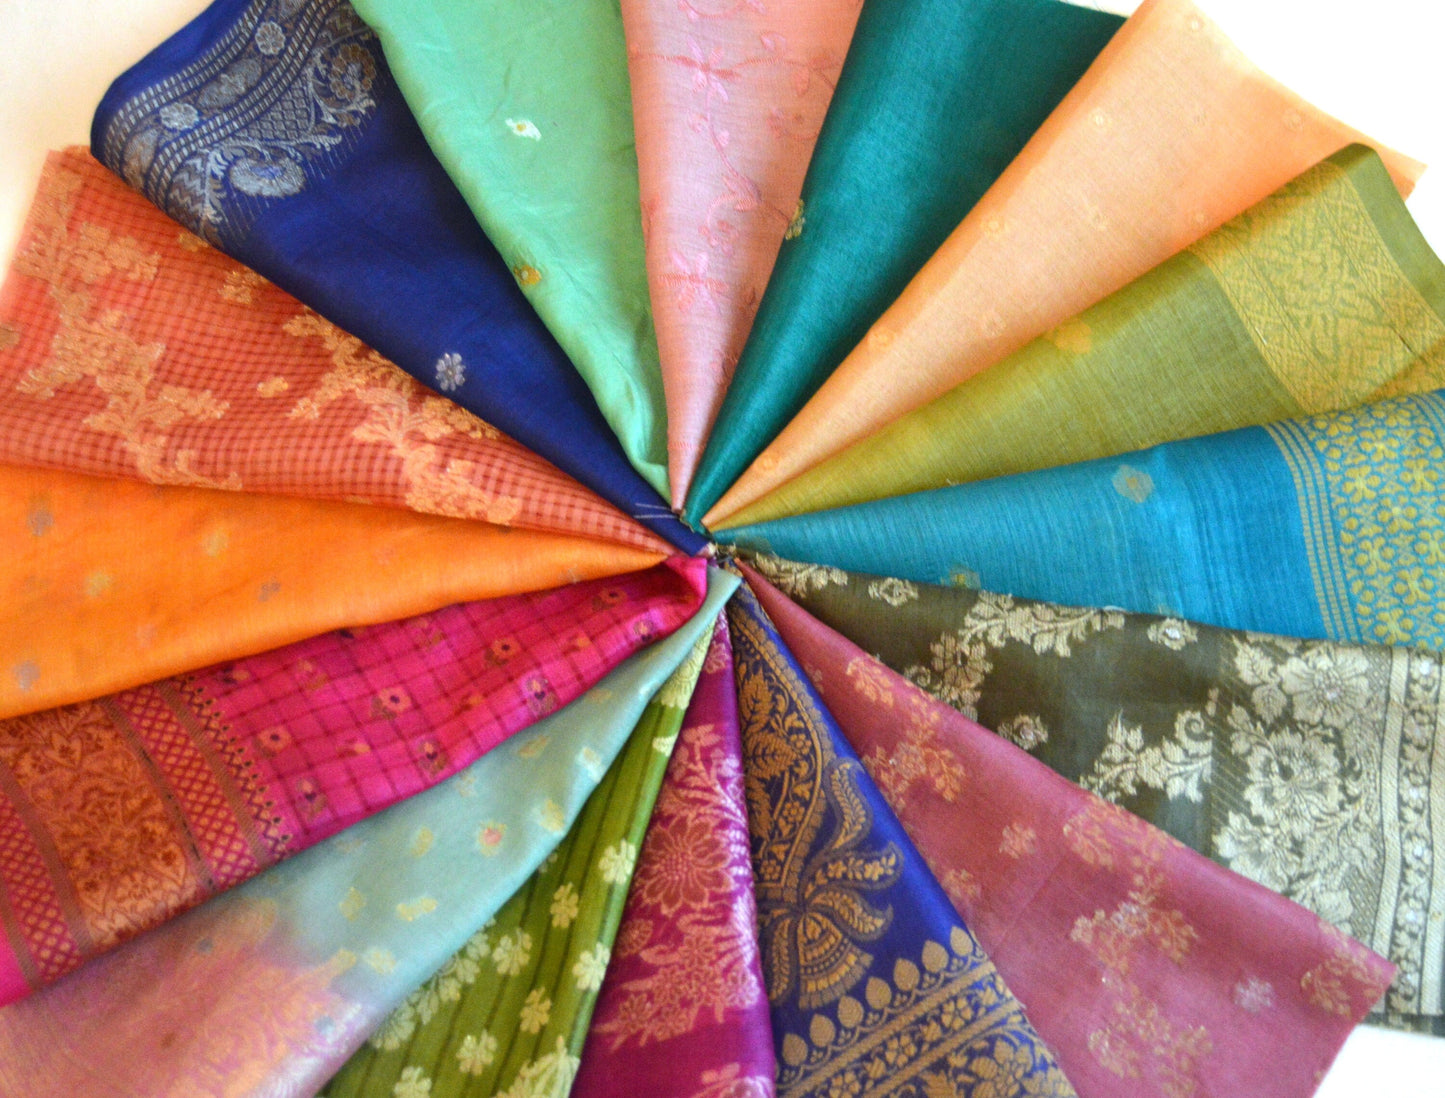 10 Inch x 16 Pieces Mixed Colour Upcycled Sari Silk Craft Fabric Card Making Collage Mixed Media Textile Art Sewing Junk Journals